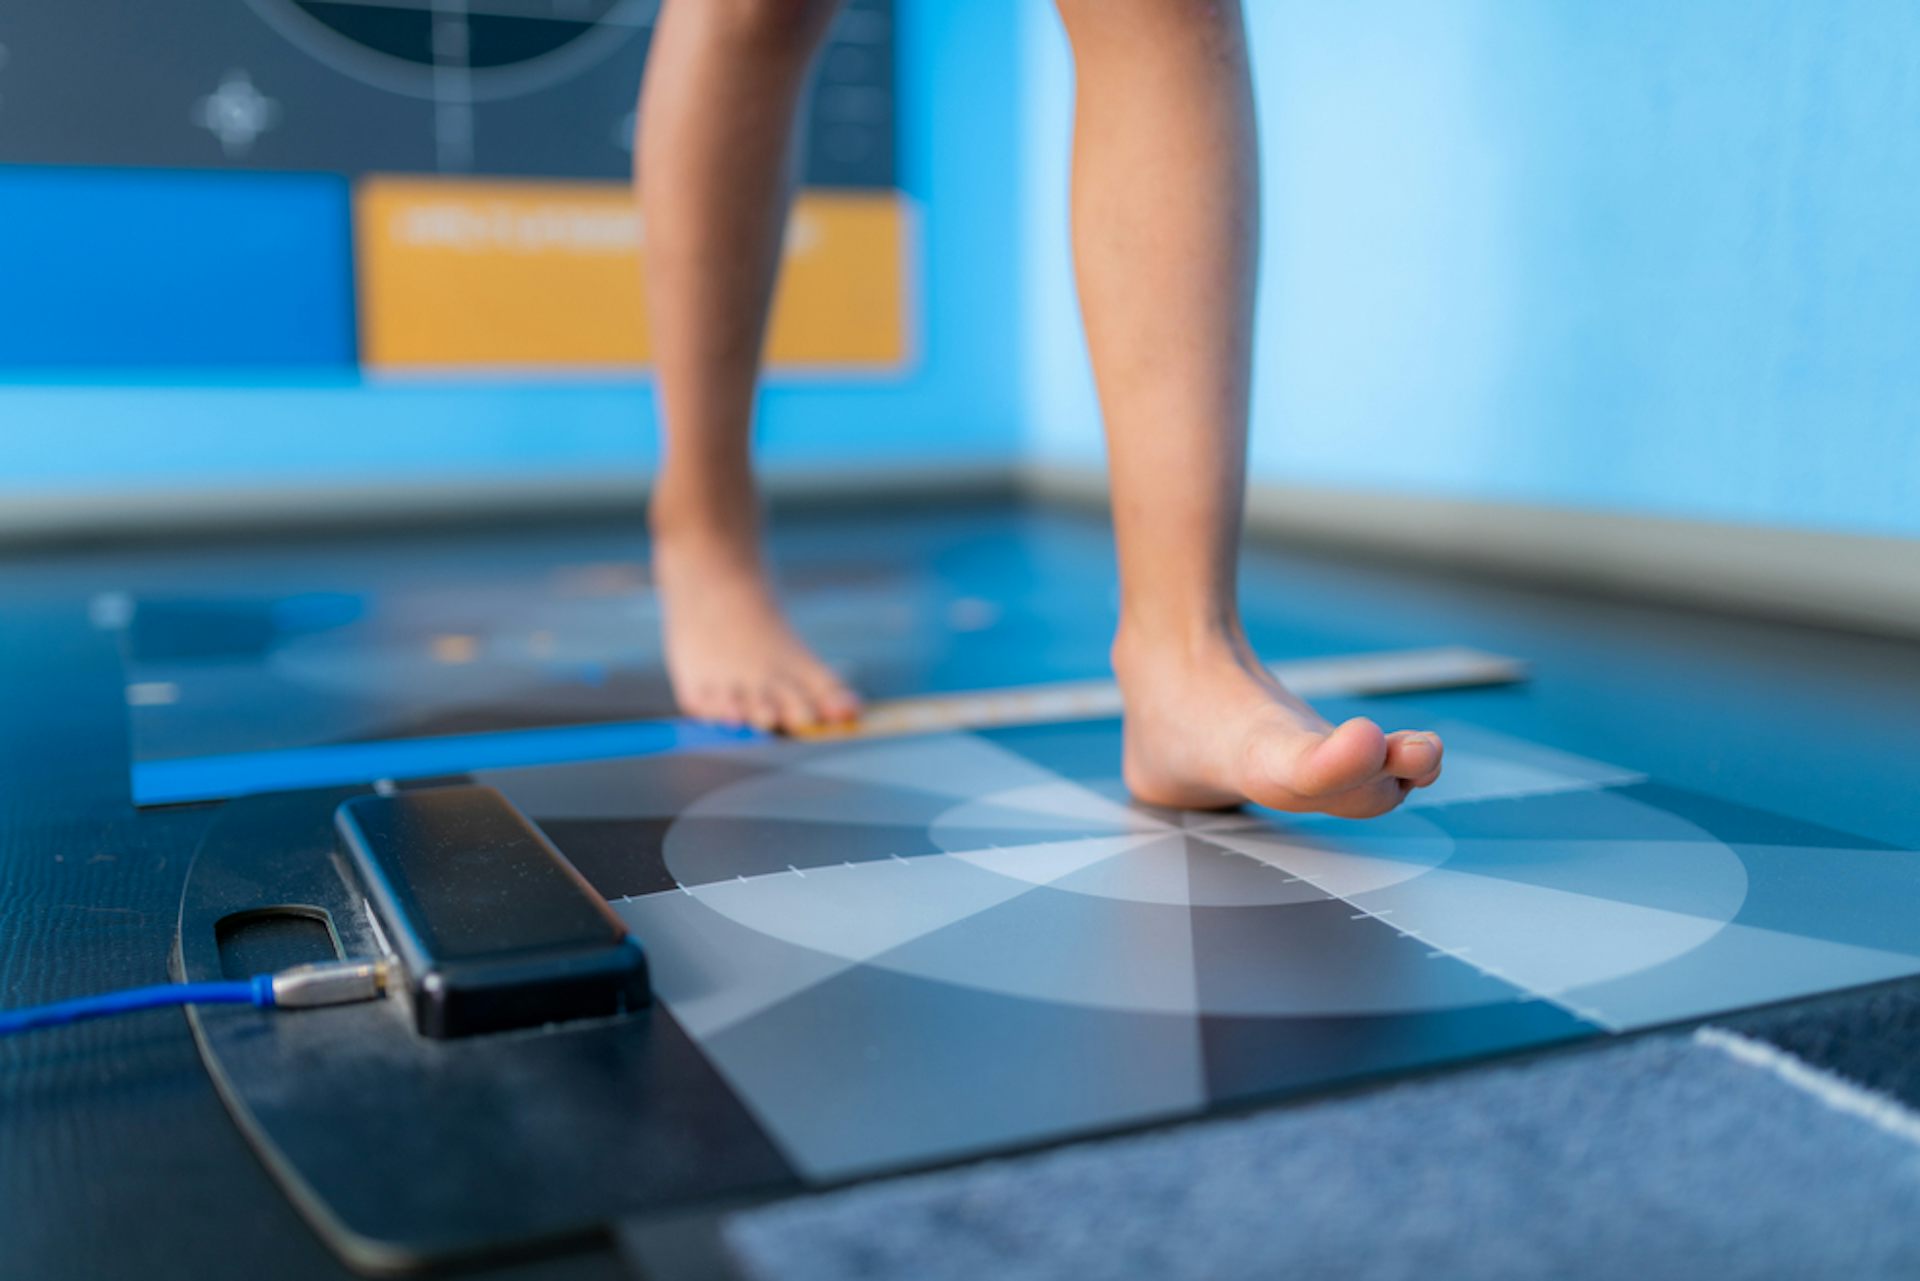 Two naked feet taking a step on a blue gait measuring plate in a laboratory